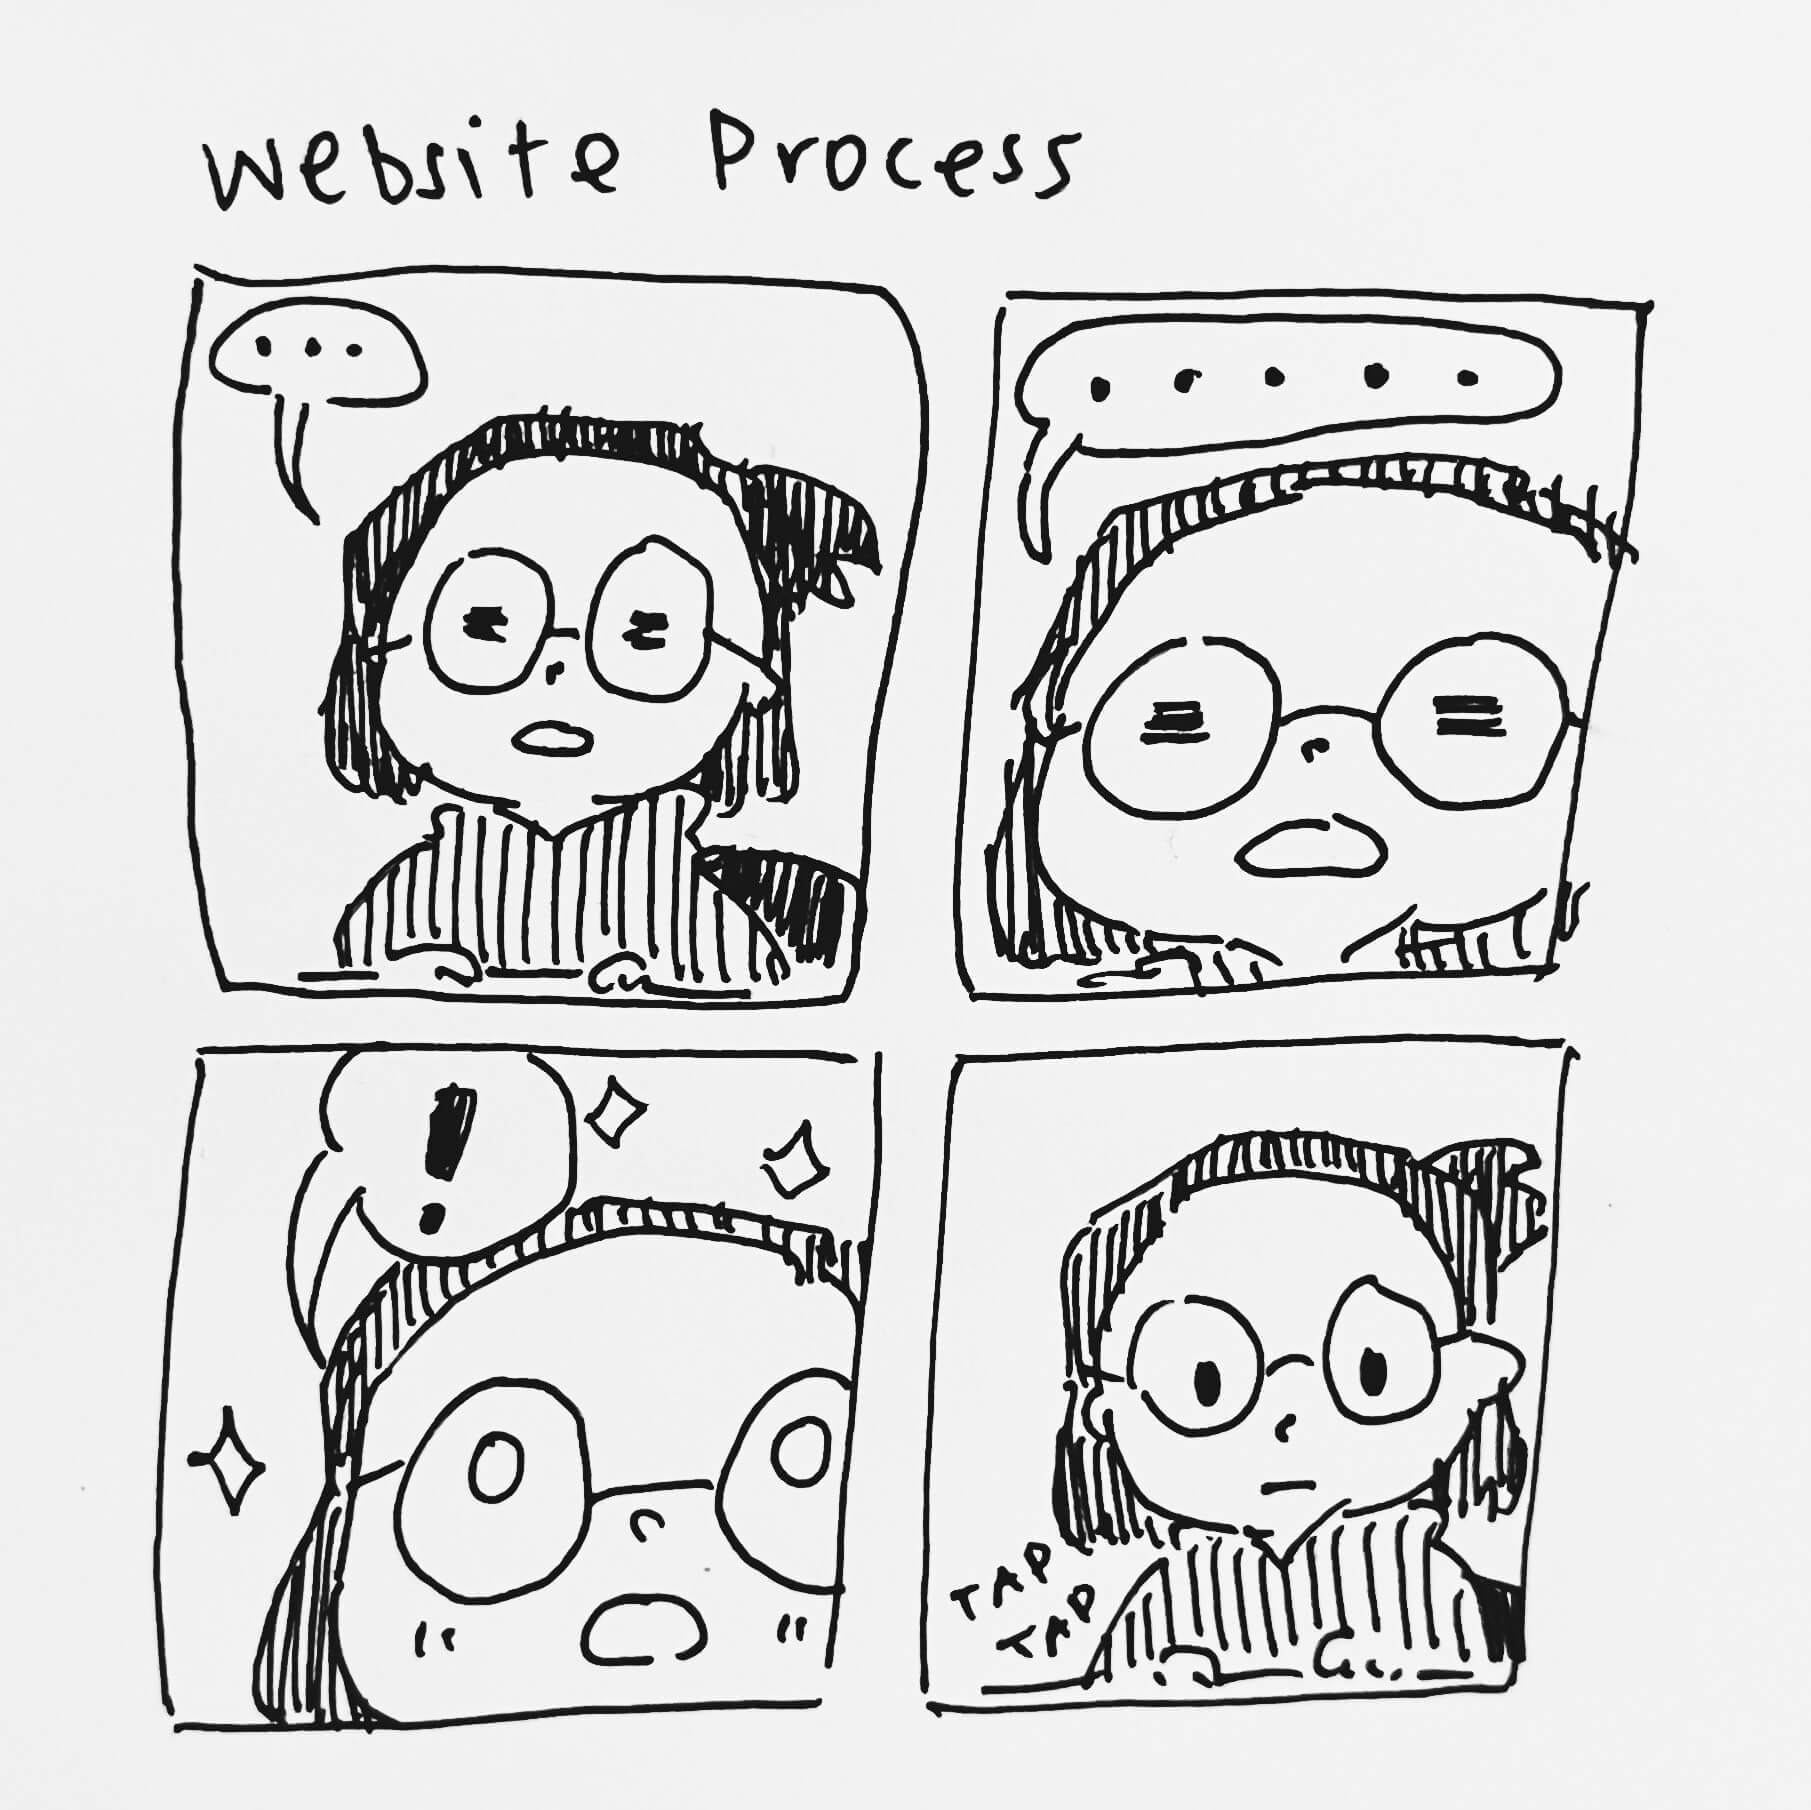 Four panel comic titled ‘Website Process’. 1) Me at my desk staring into space and looking dazed, with a speech bubble going ‘…’. 2) me still at my desk, and an even longer ellipsis. 3) I have an epiphany. 4) I’m tapping on my keyboard.